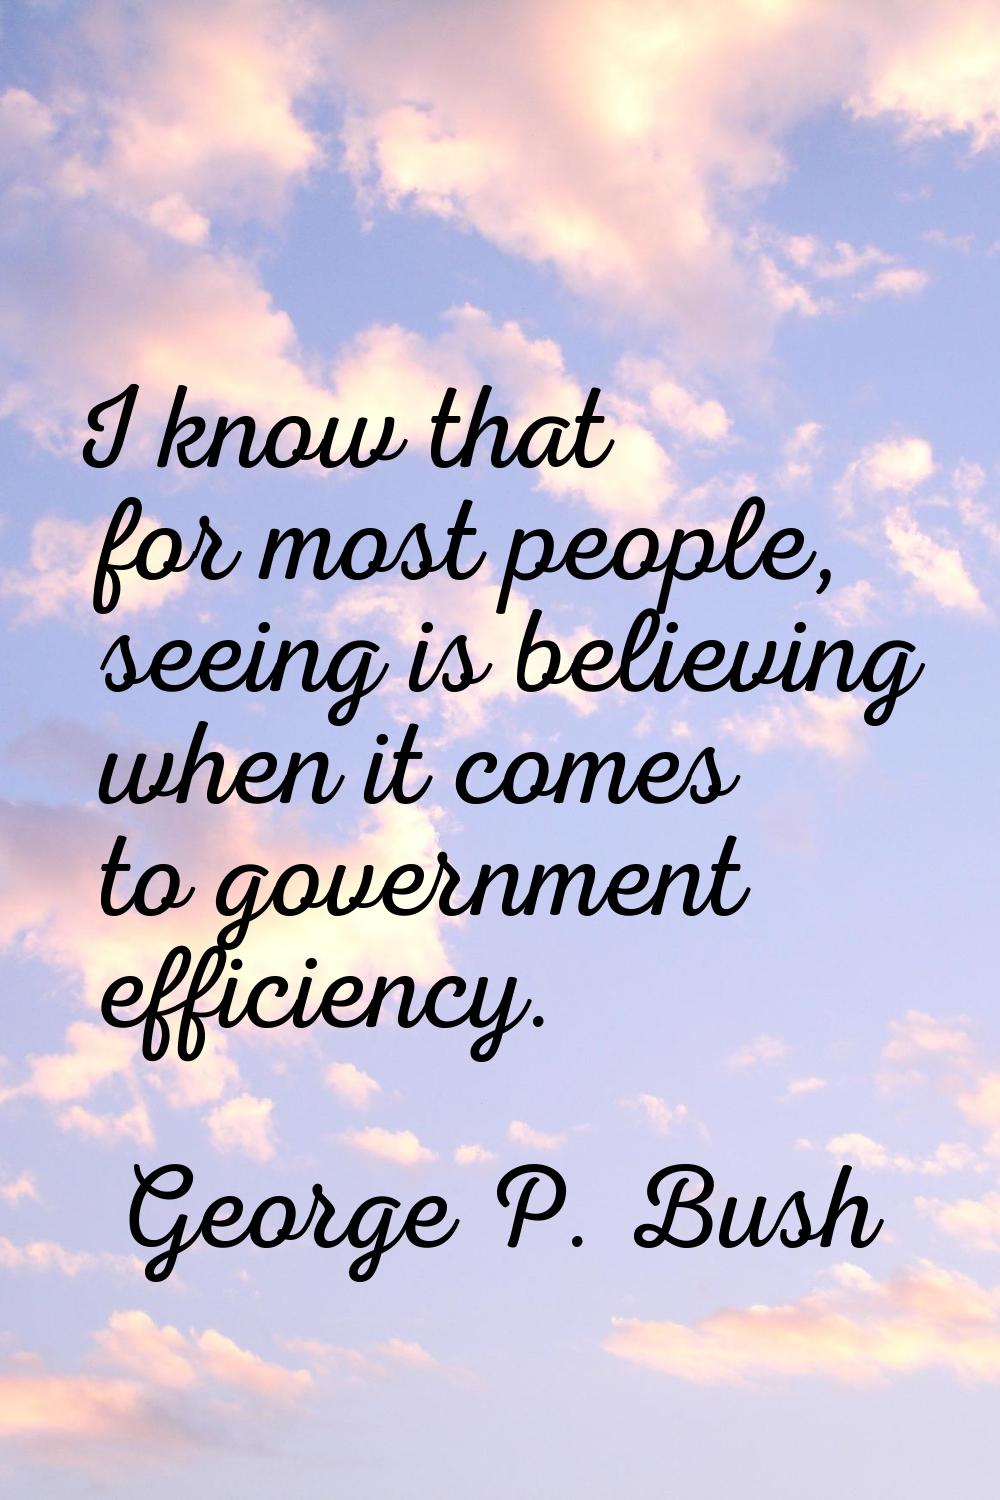 I know that for most people, seeing is believing when it comes to government efficiency.